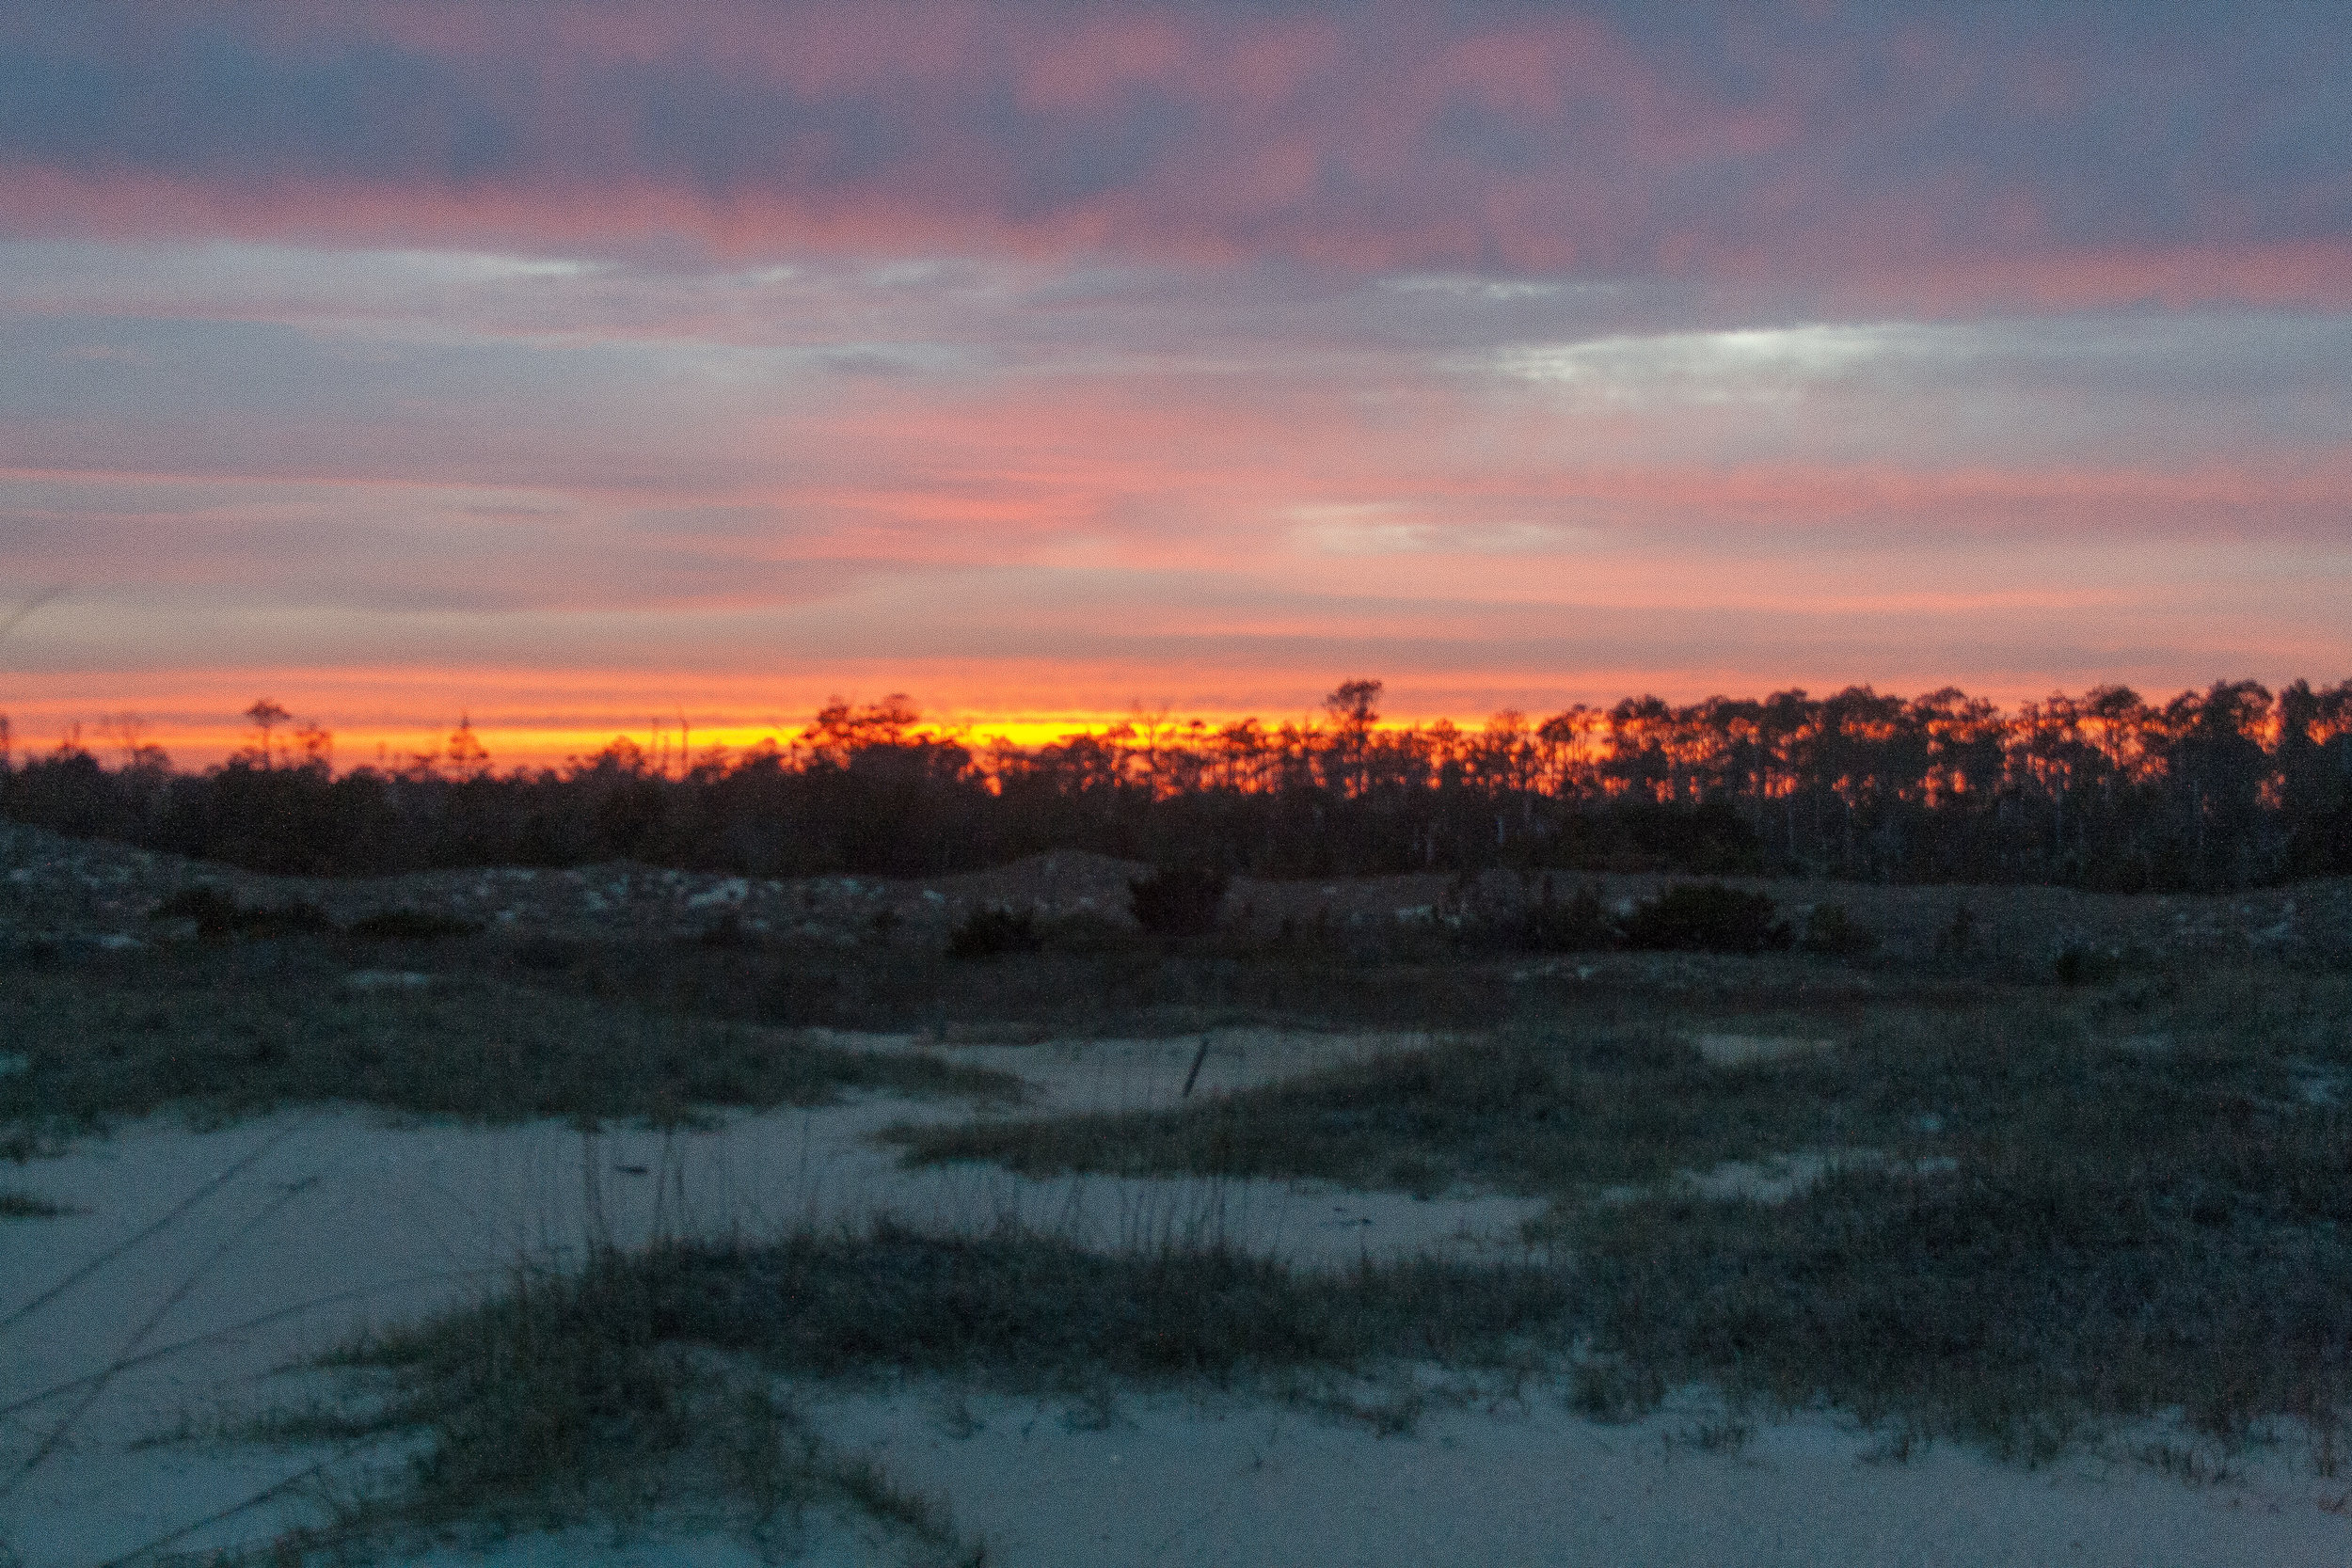  Sunset on South Core Island (Cape Lookout). 